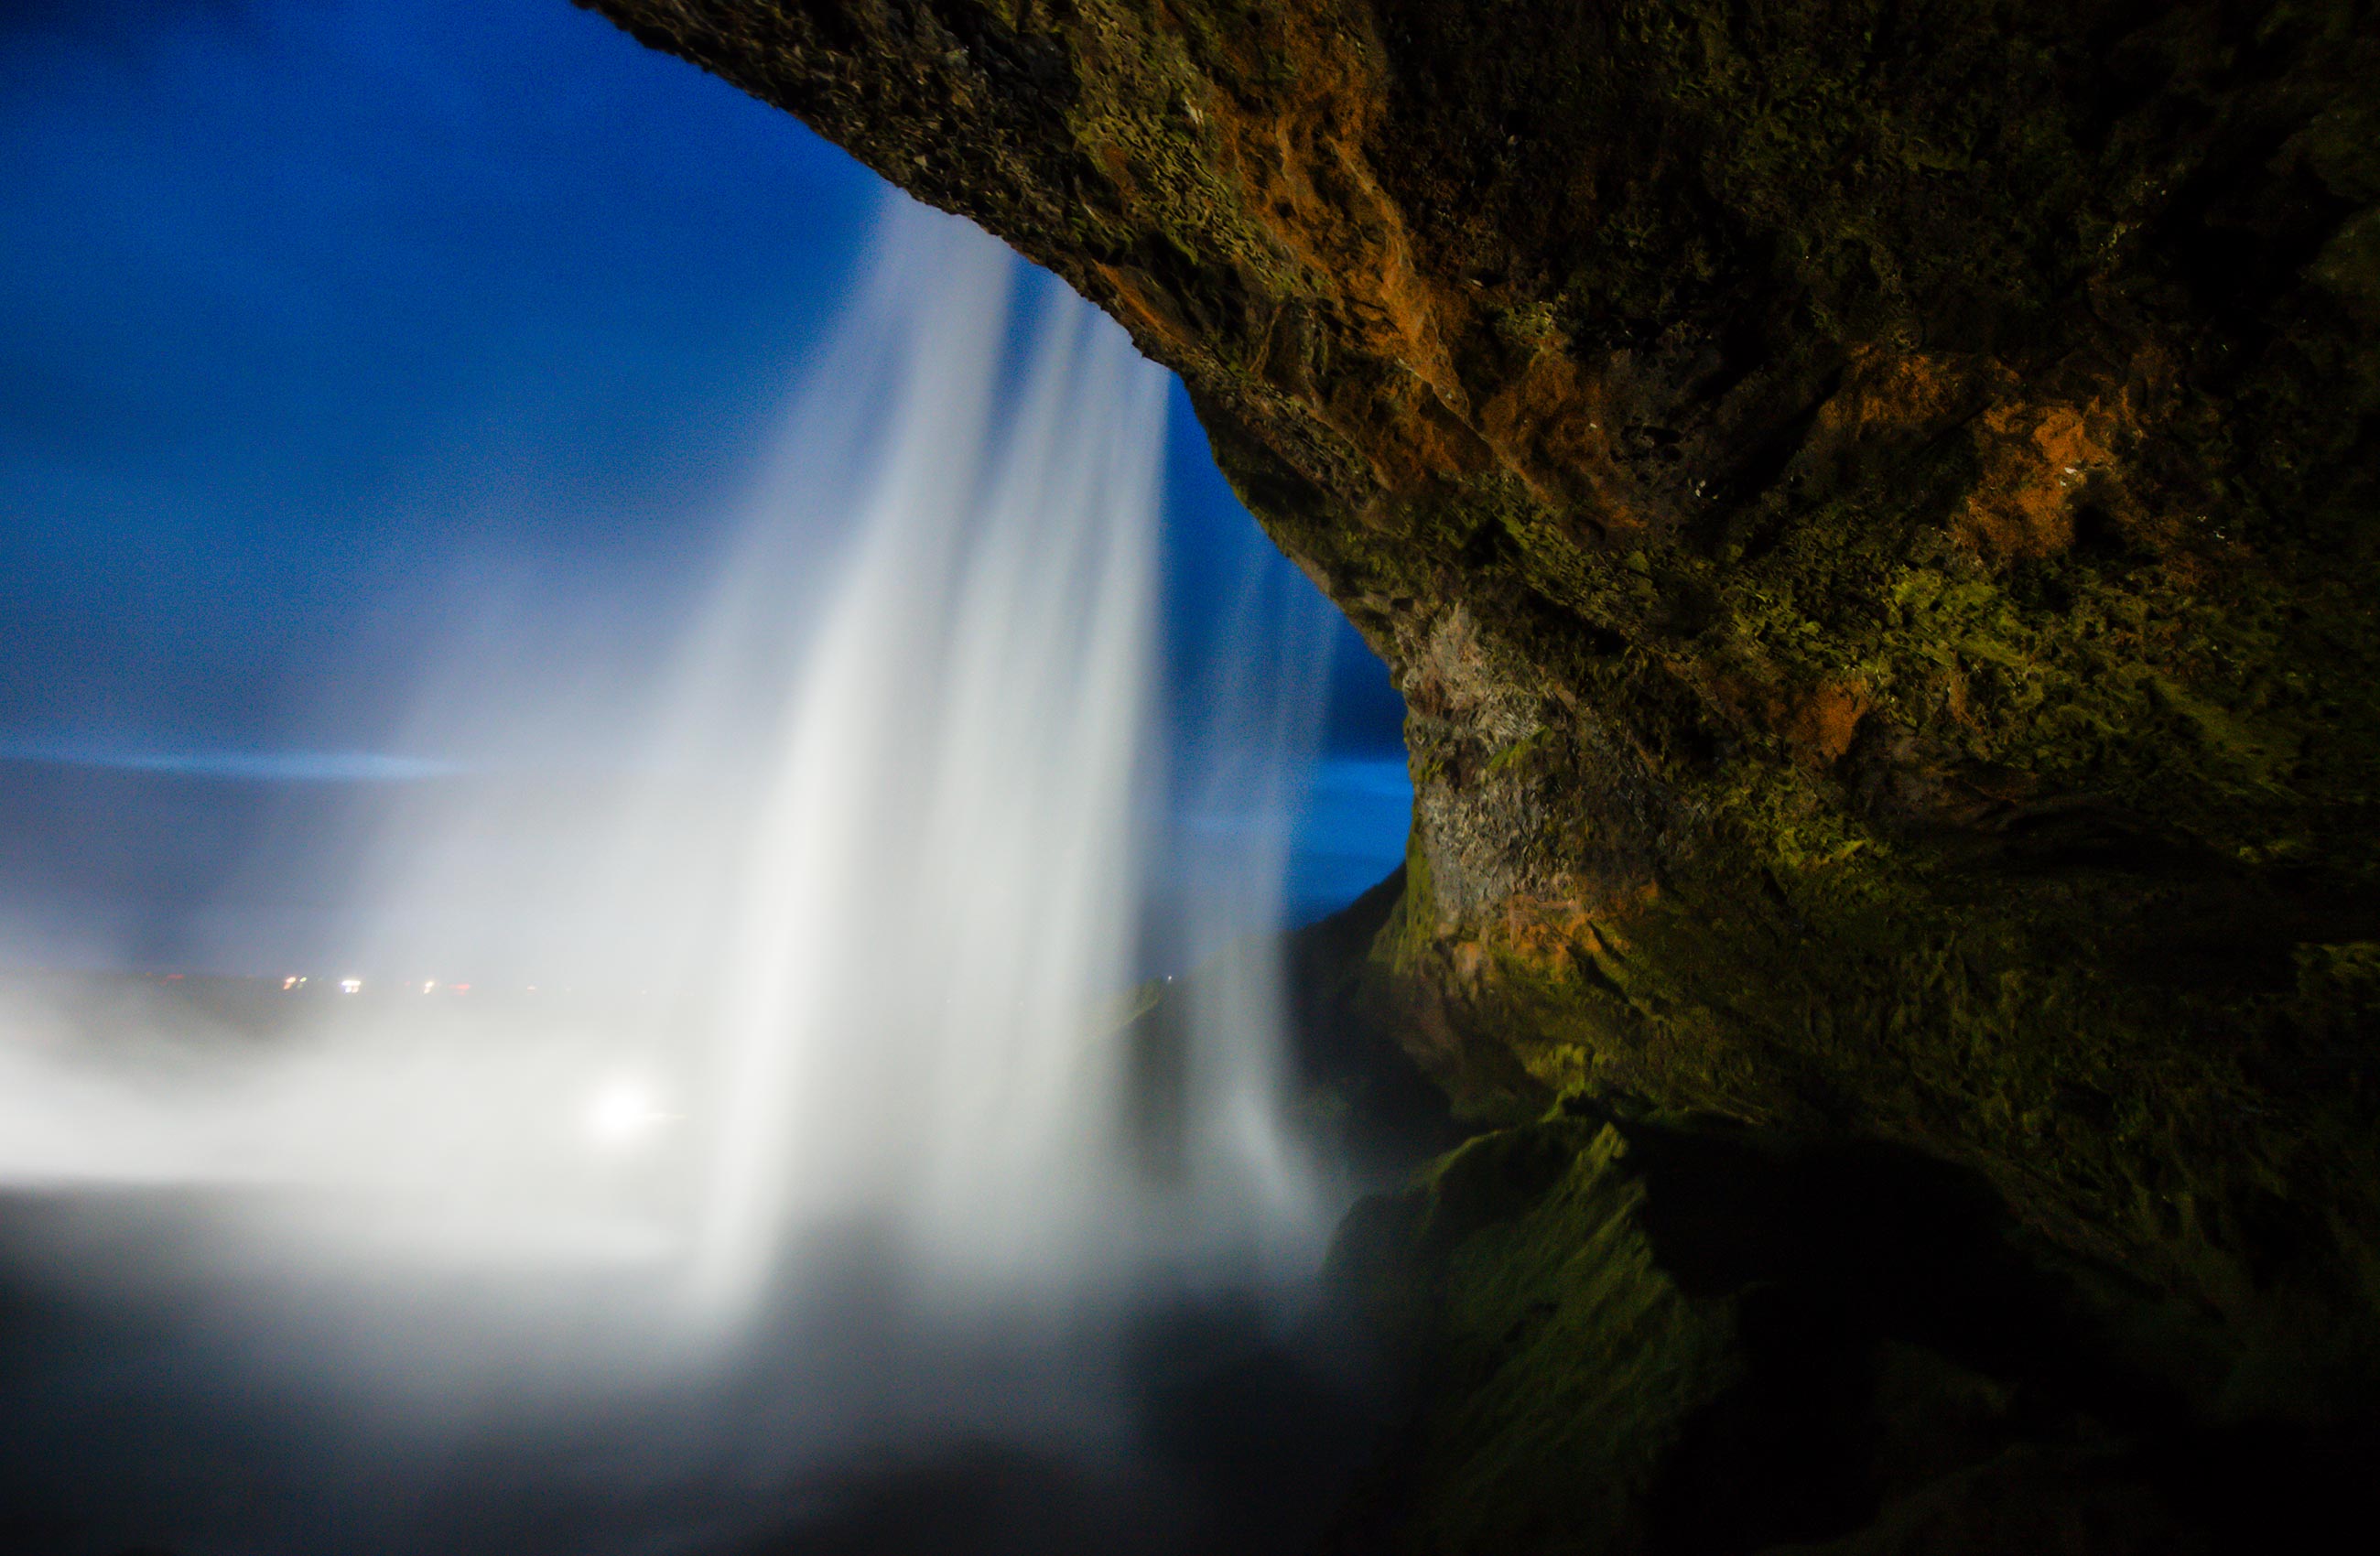 Long exposure photography behind the Skogafoss Waterfall in Iceland at dusk